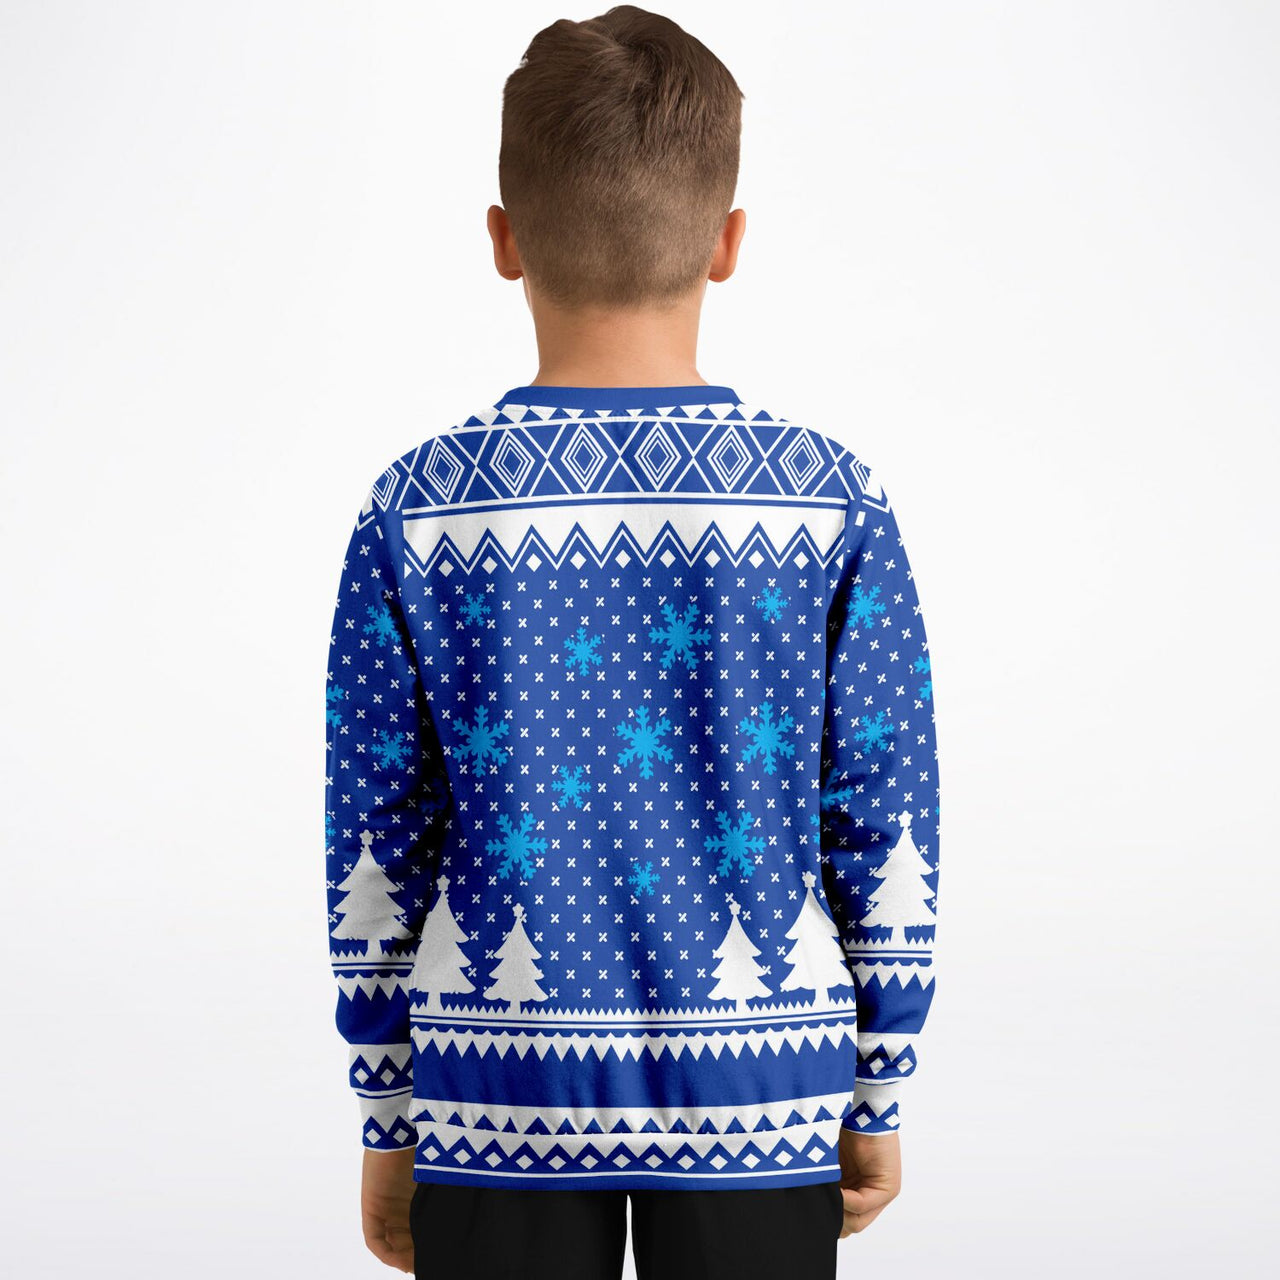 Prickly and Lit-Ugly Fashion Kids/Youth Sweatshirt – AOP